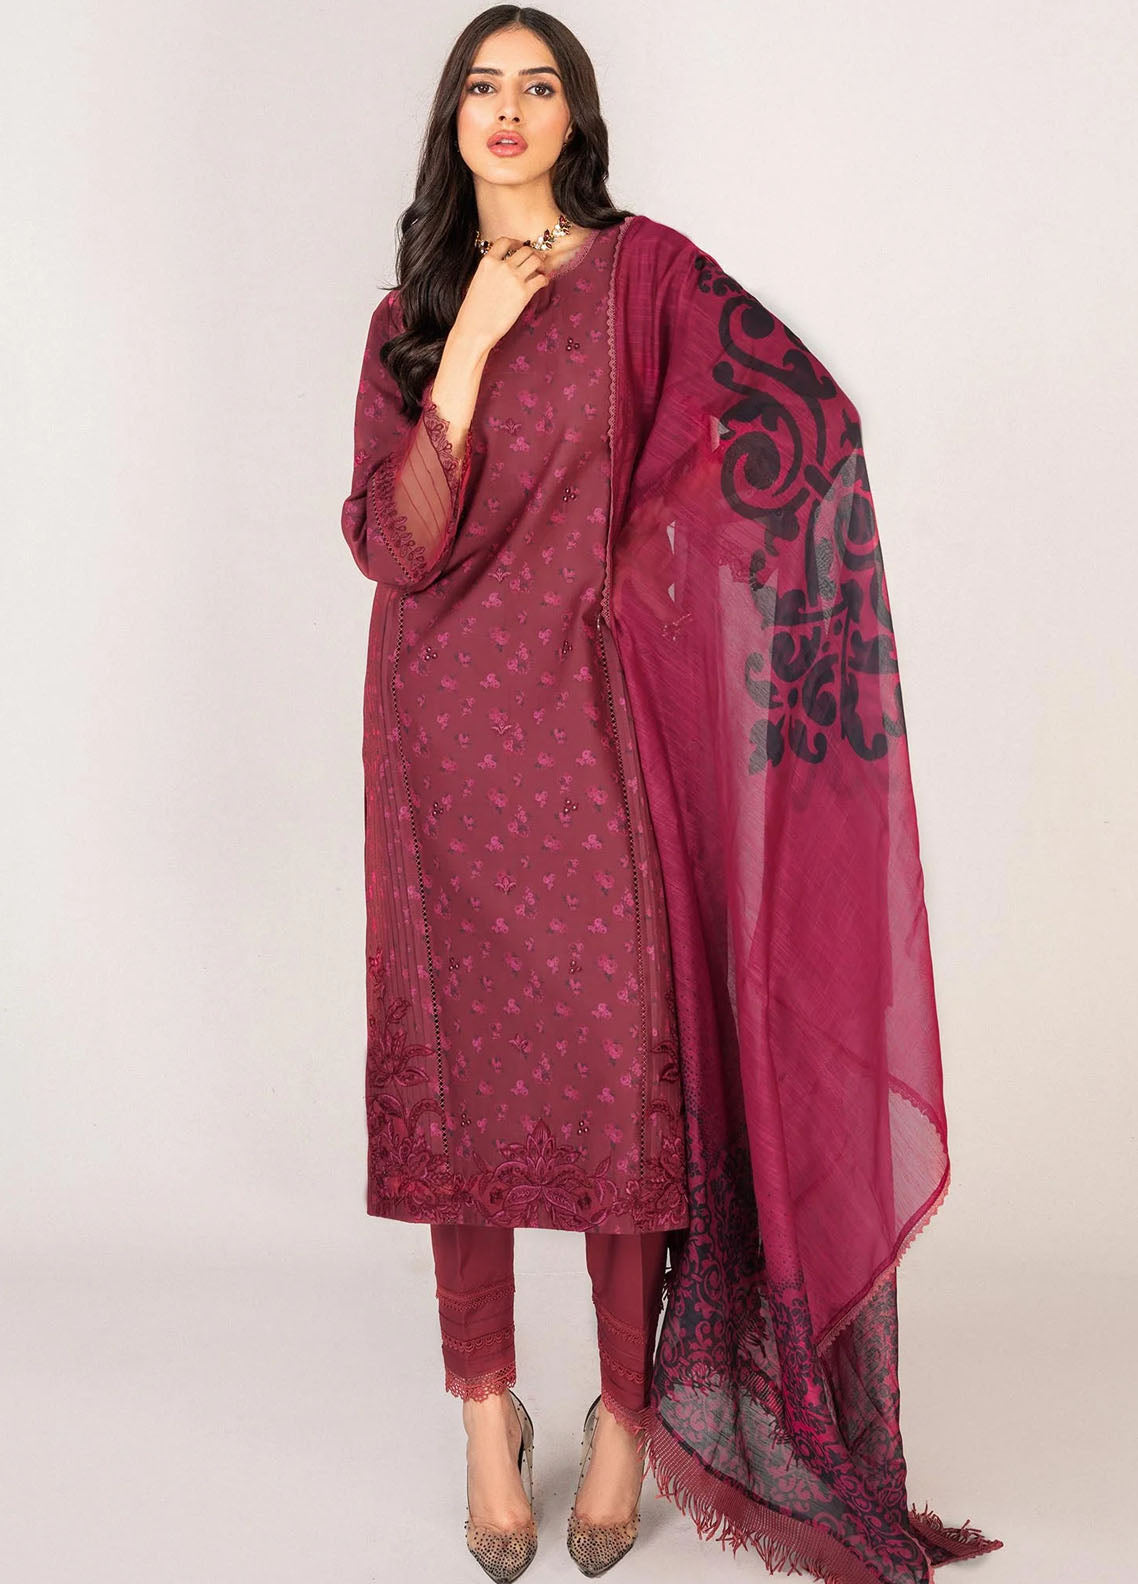 Serene By Shazme Unstitched Lawn Collection 2023 SH-03 Majestic Maroon